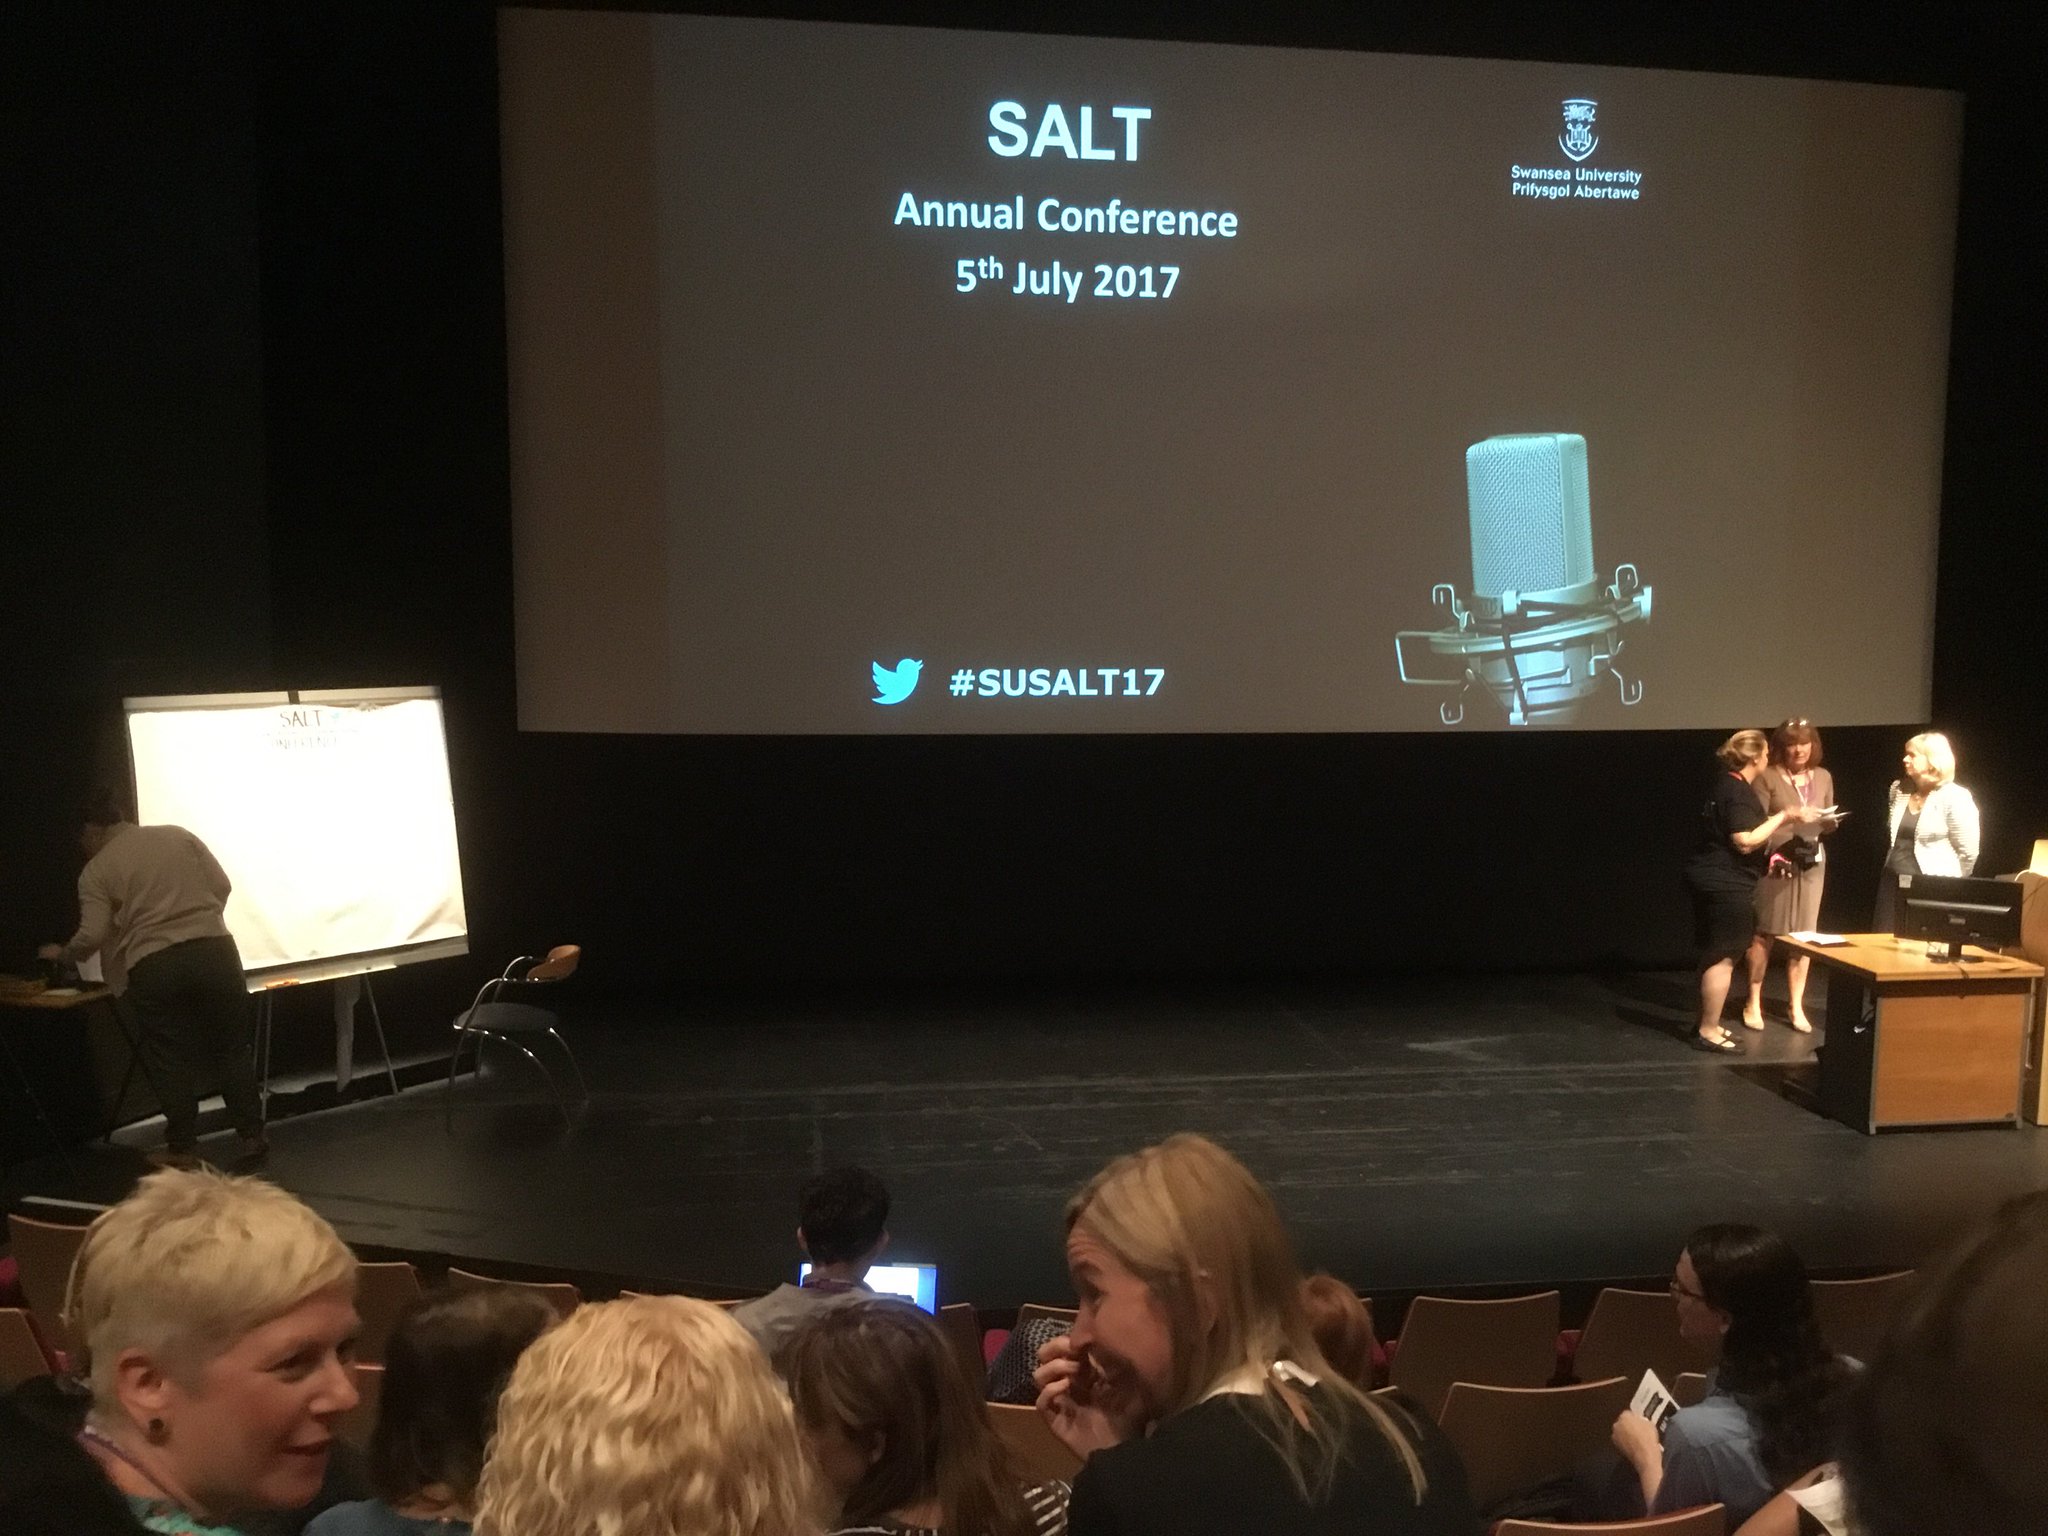 Getting ready for the opening of #susalt17 with Jane Thomas @debbaff and @c4lpt and Helen on the Pens https://t.co/hxUMwRlXDJ